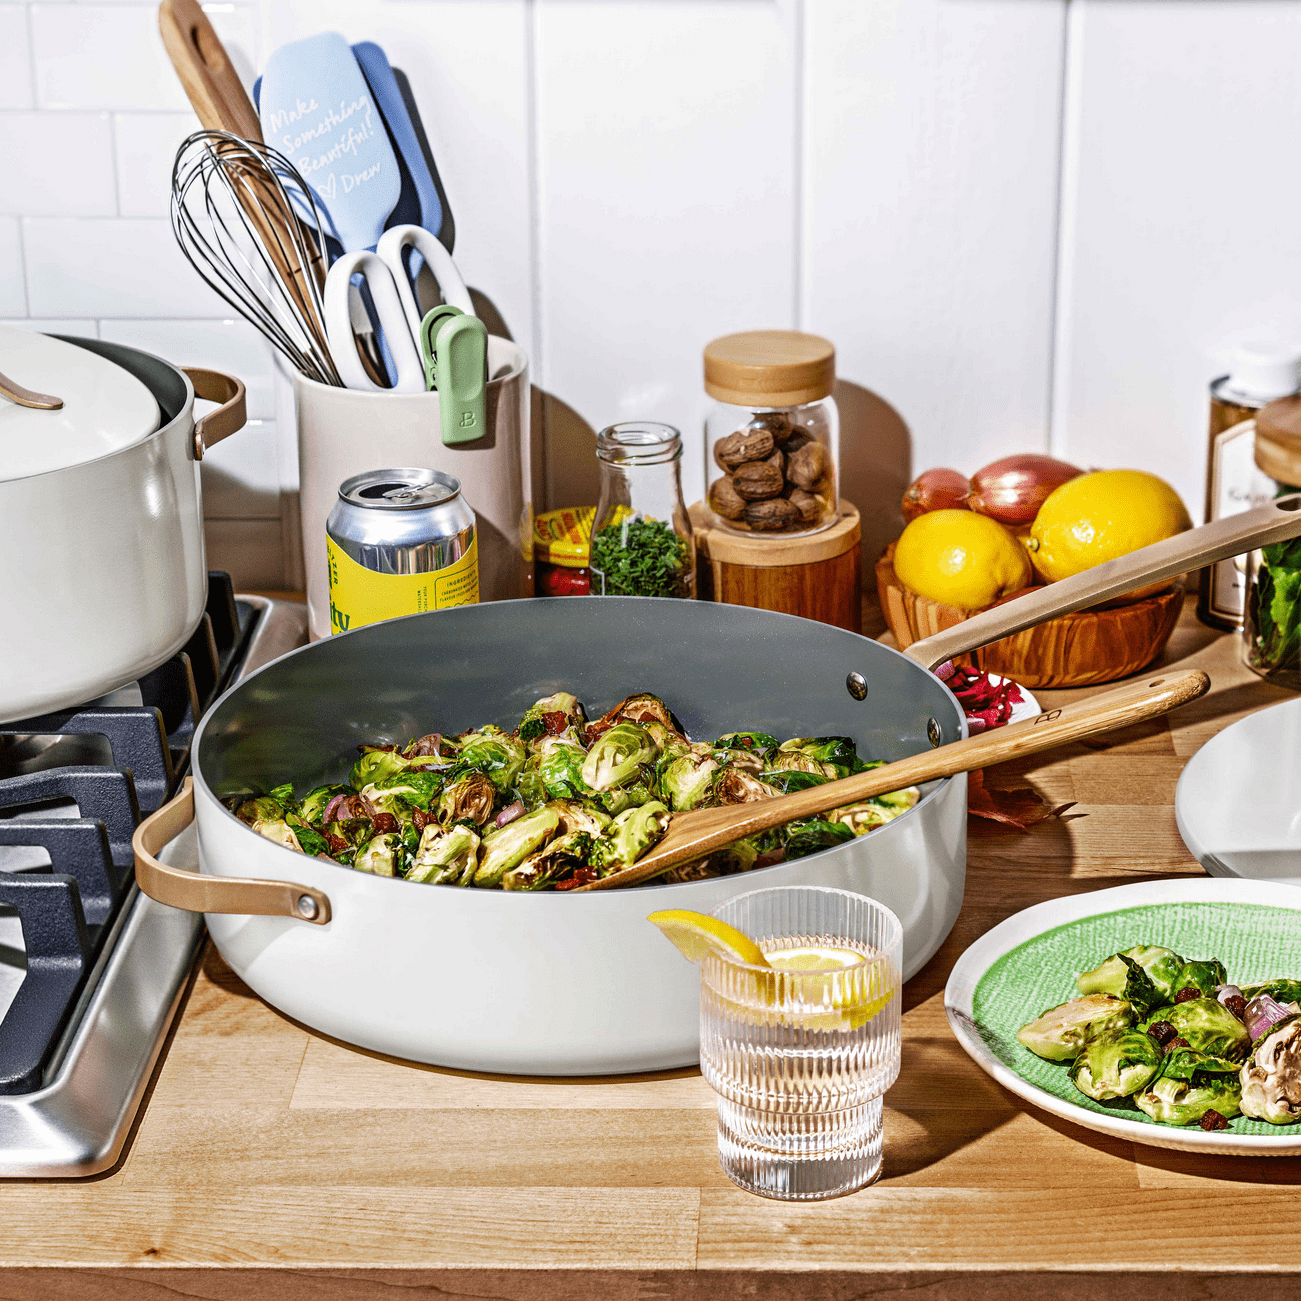 Beautiful Kitchenware - We're toasting the good news: the full